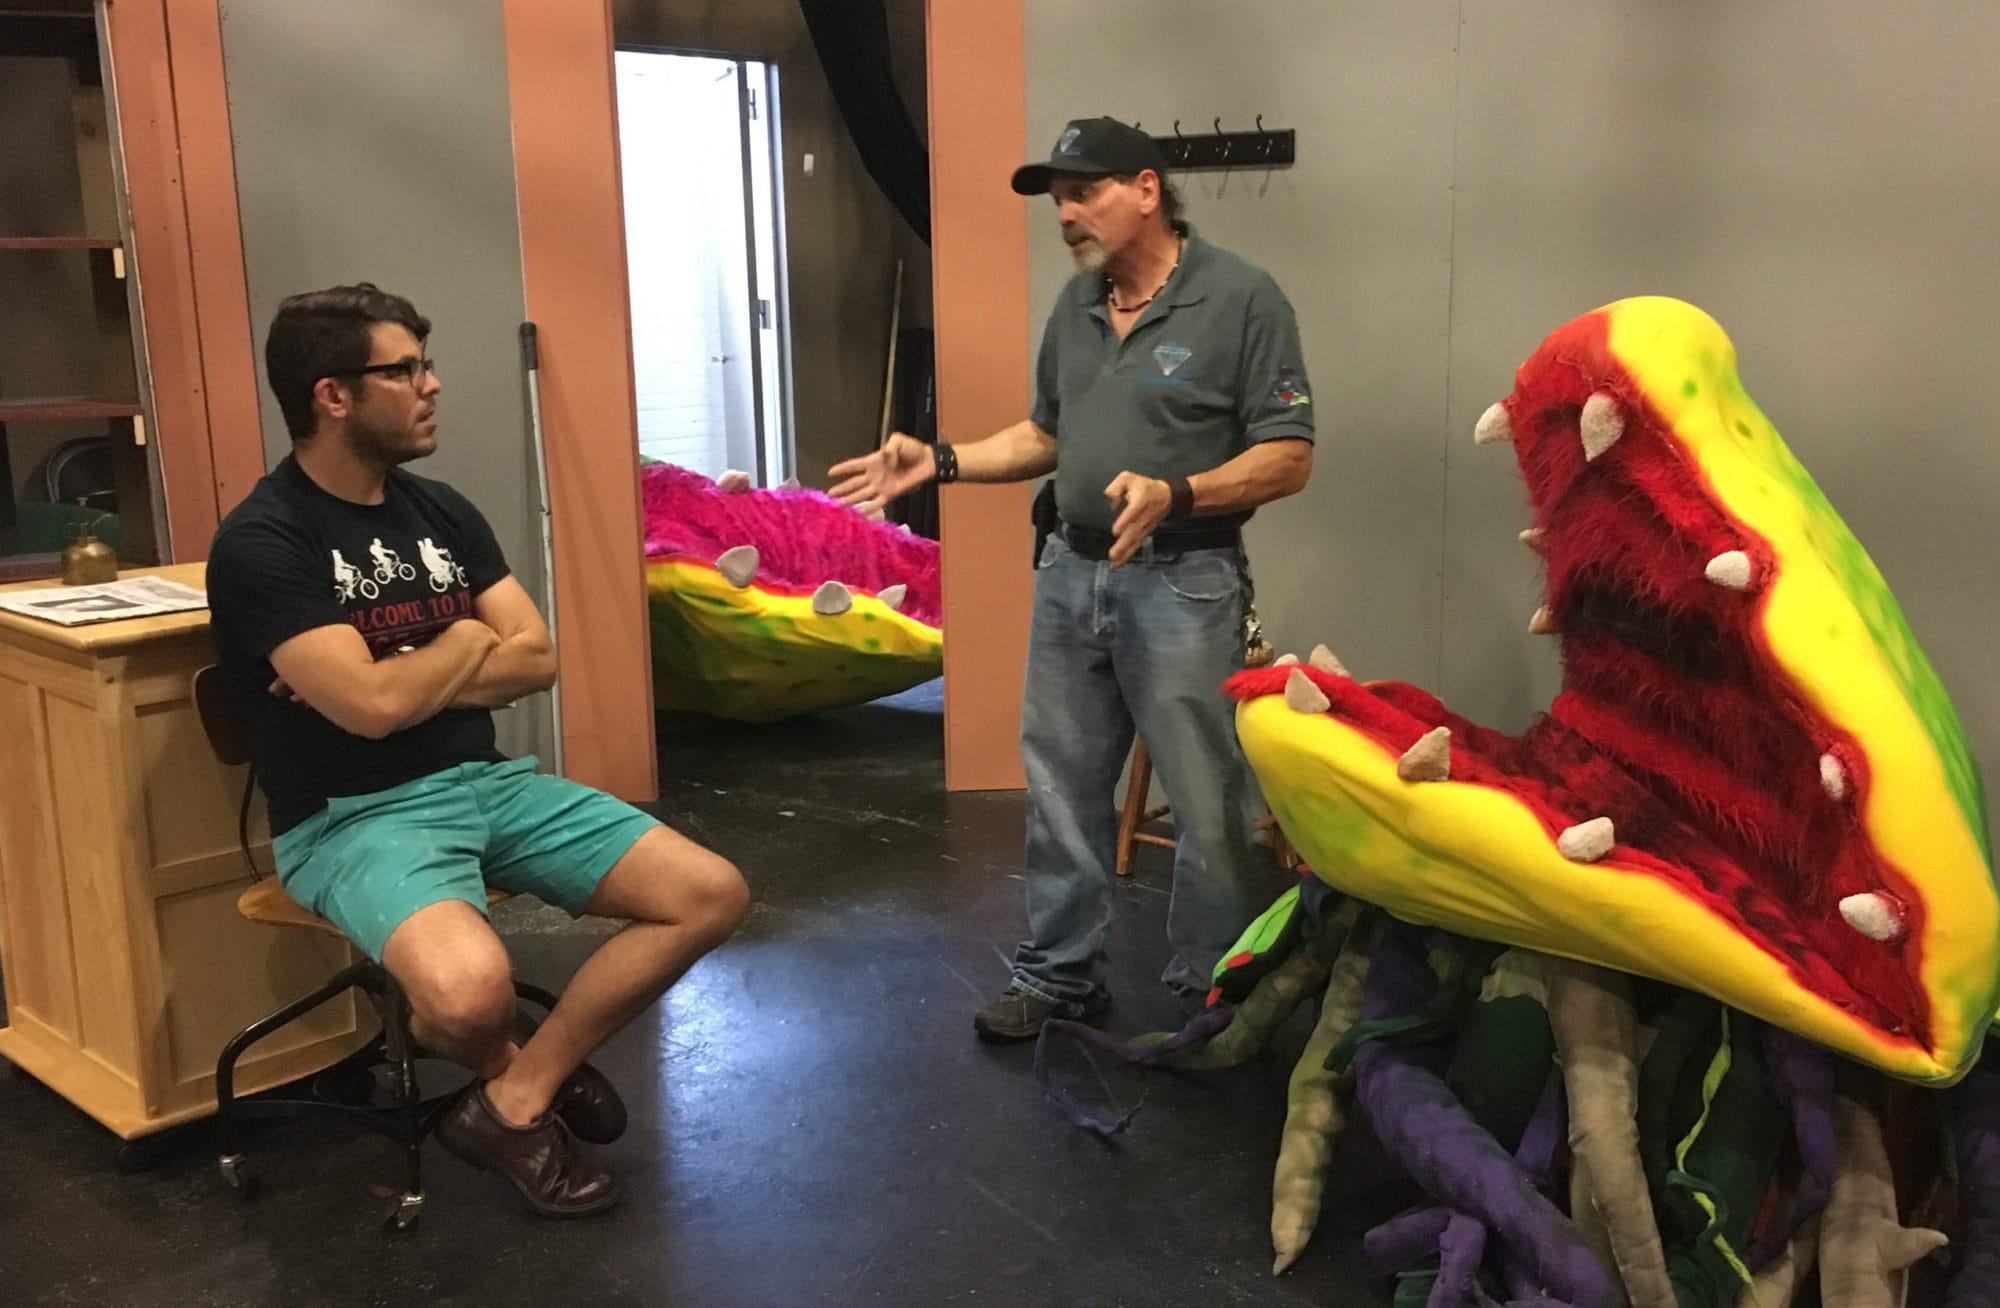 Casey Fero (playing Seymour), Bill Diamond (puppet designer, fabricator and instructor), and Audrey II (puppet) in rehearsal for 'Little Shop of Horrors' at Workhouse Arts Center. Photo courtesy of Workhouse Arts Center.